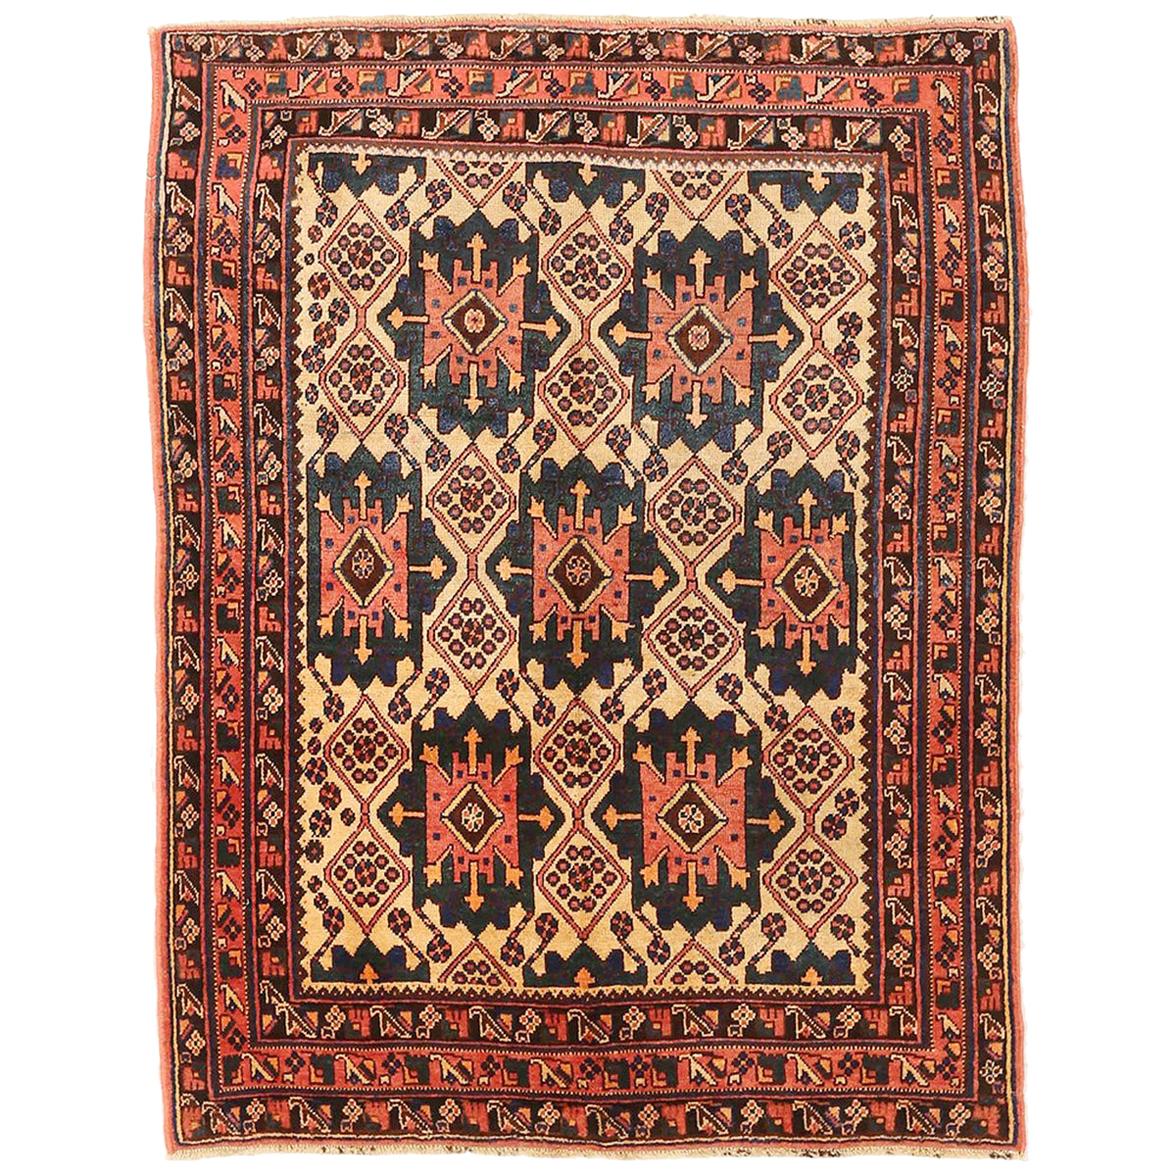 Antique Persian Sirjan Rug with Black and Red Geometric Medallions